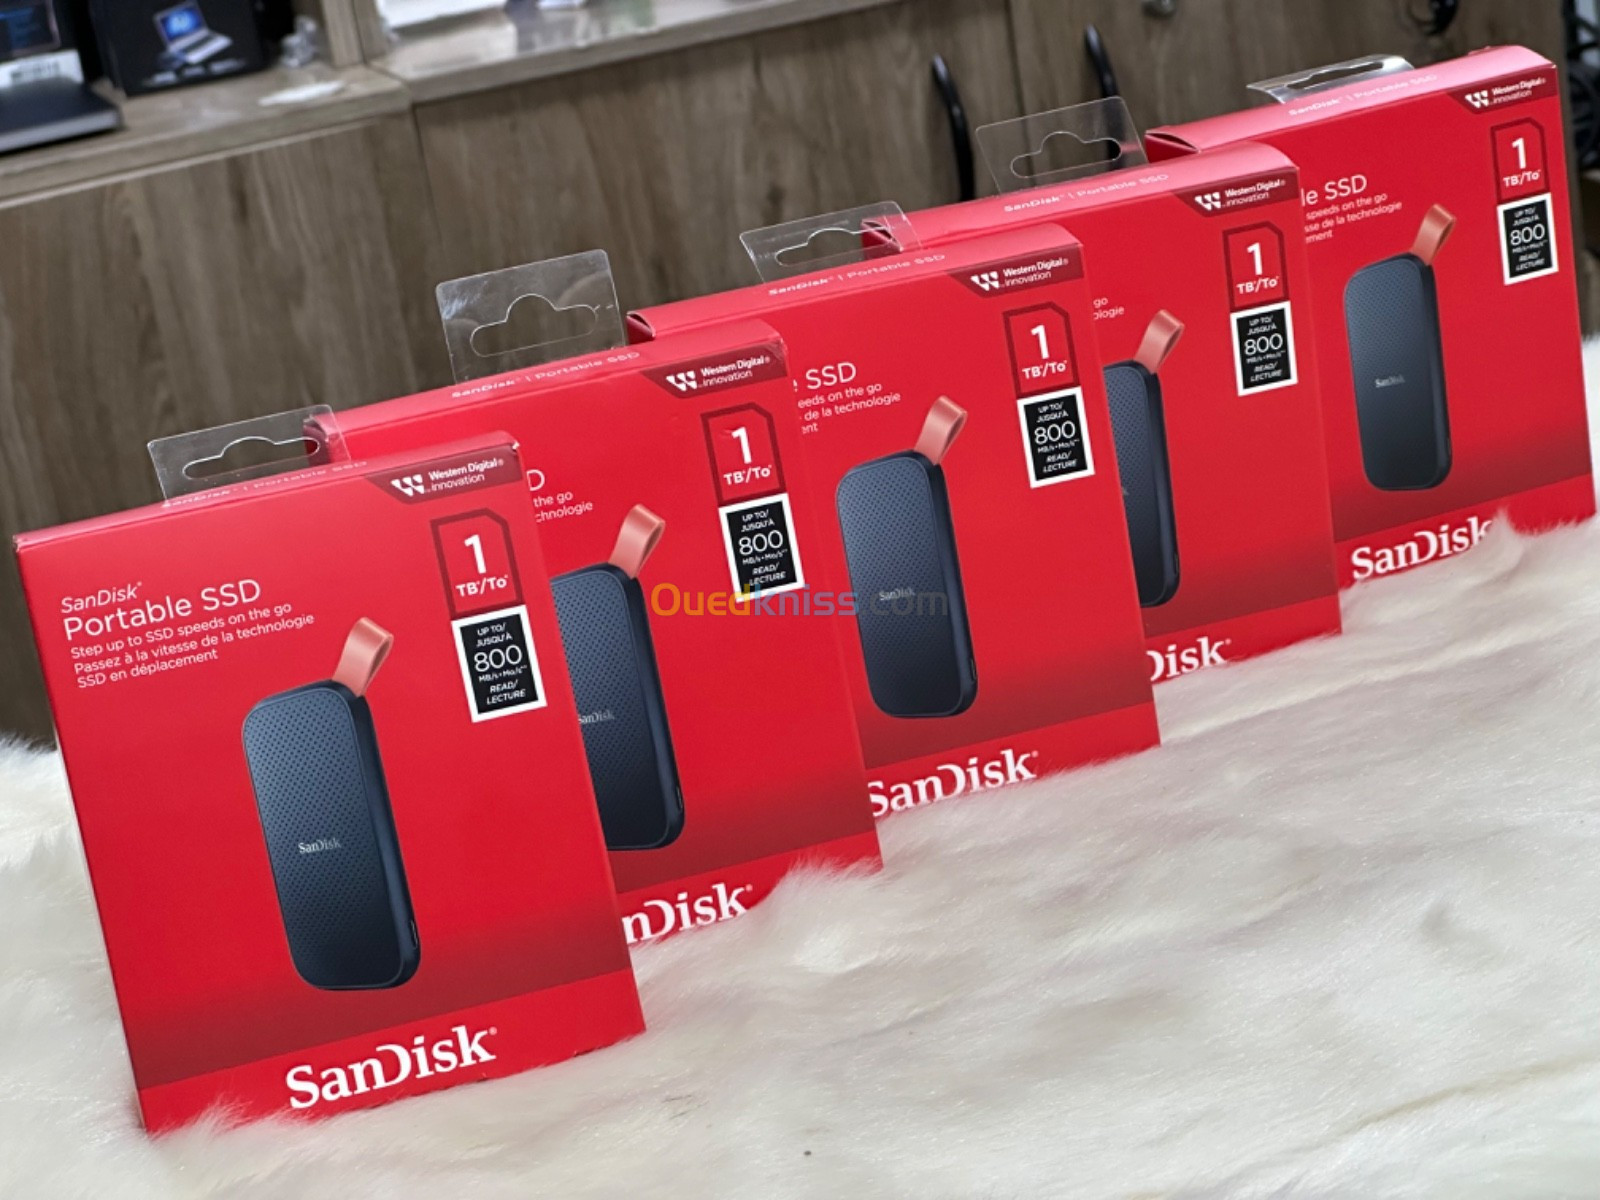 SANDISK PORTABLE SSD 1TO 800MB/S 